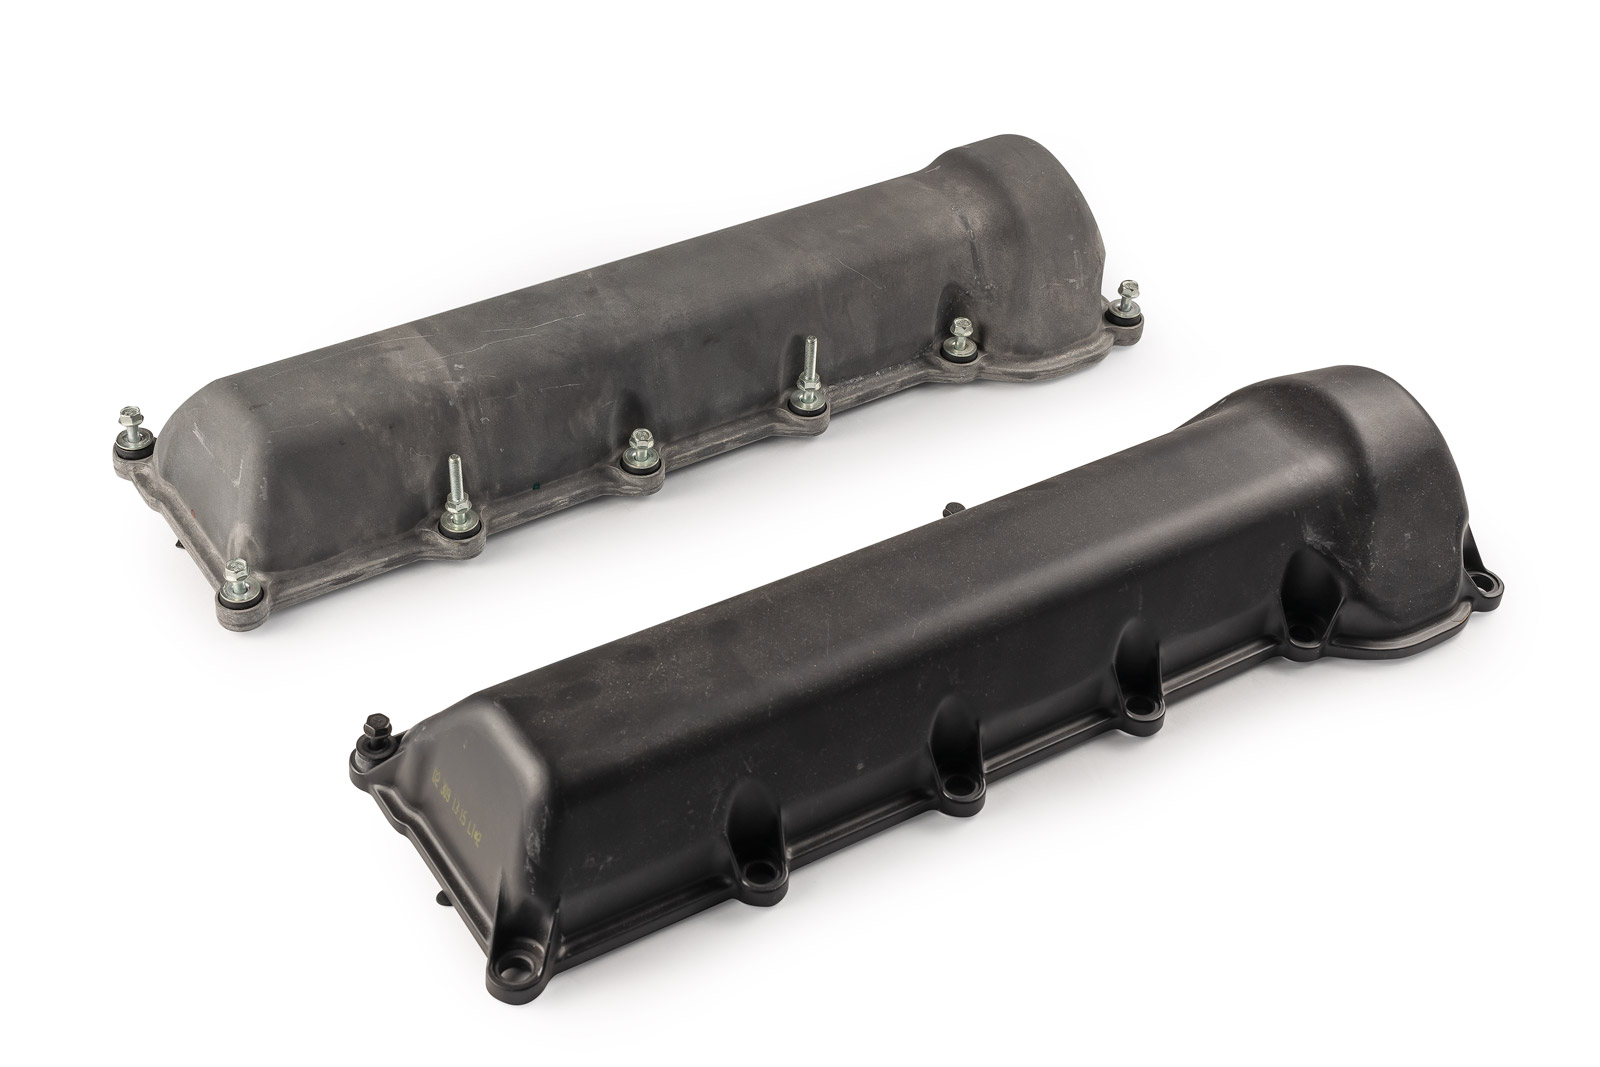 Valve Covers - Metal to Plastic Conversion